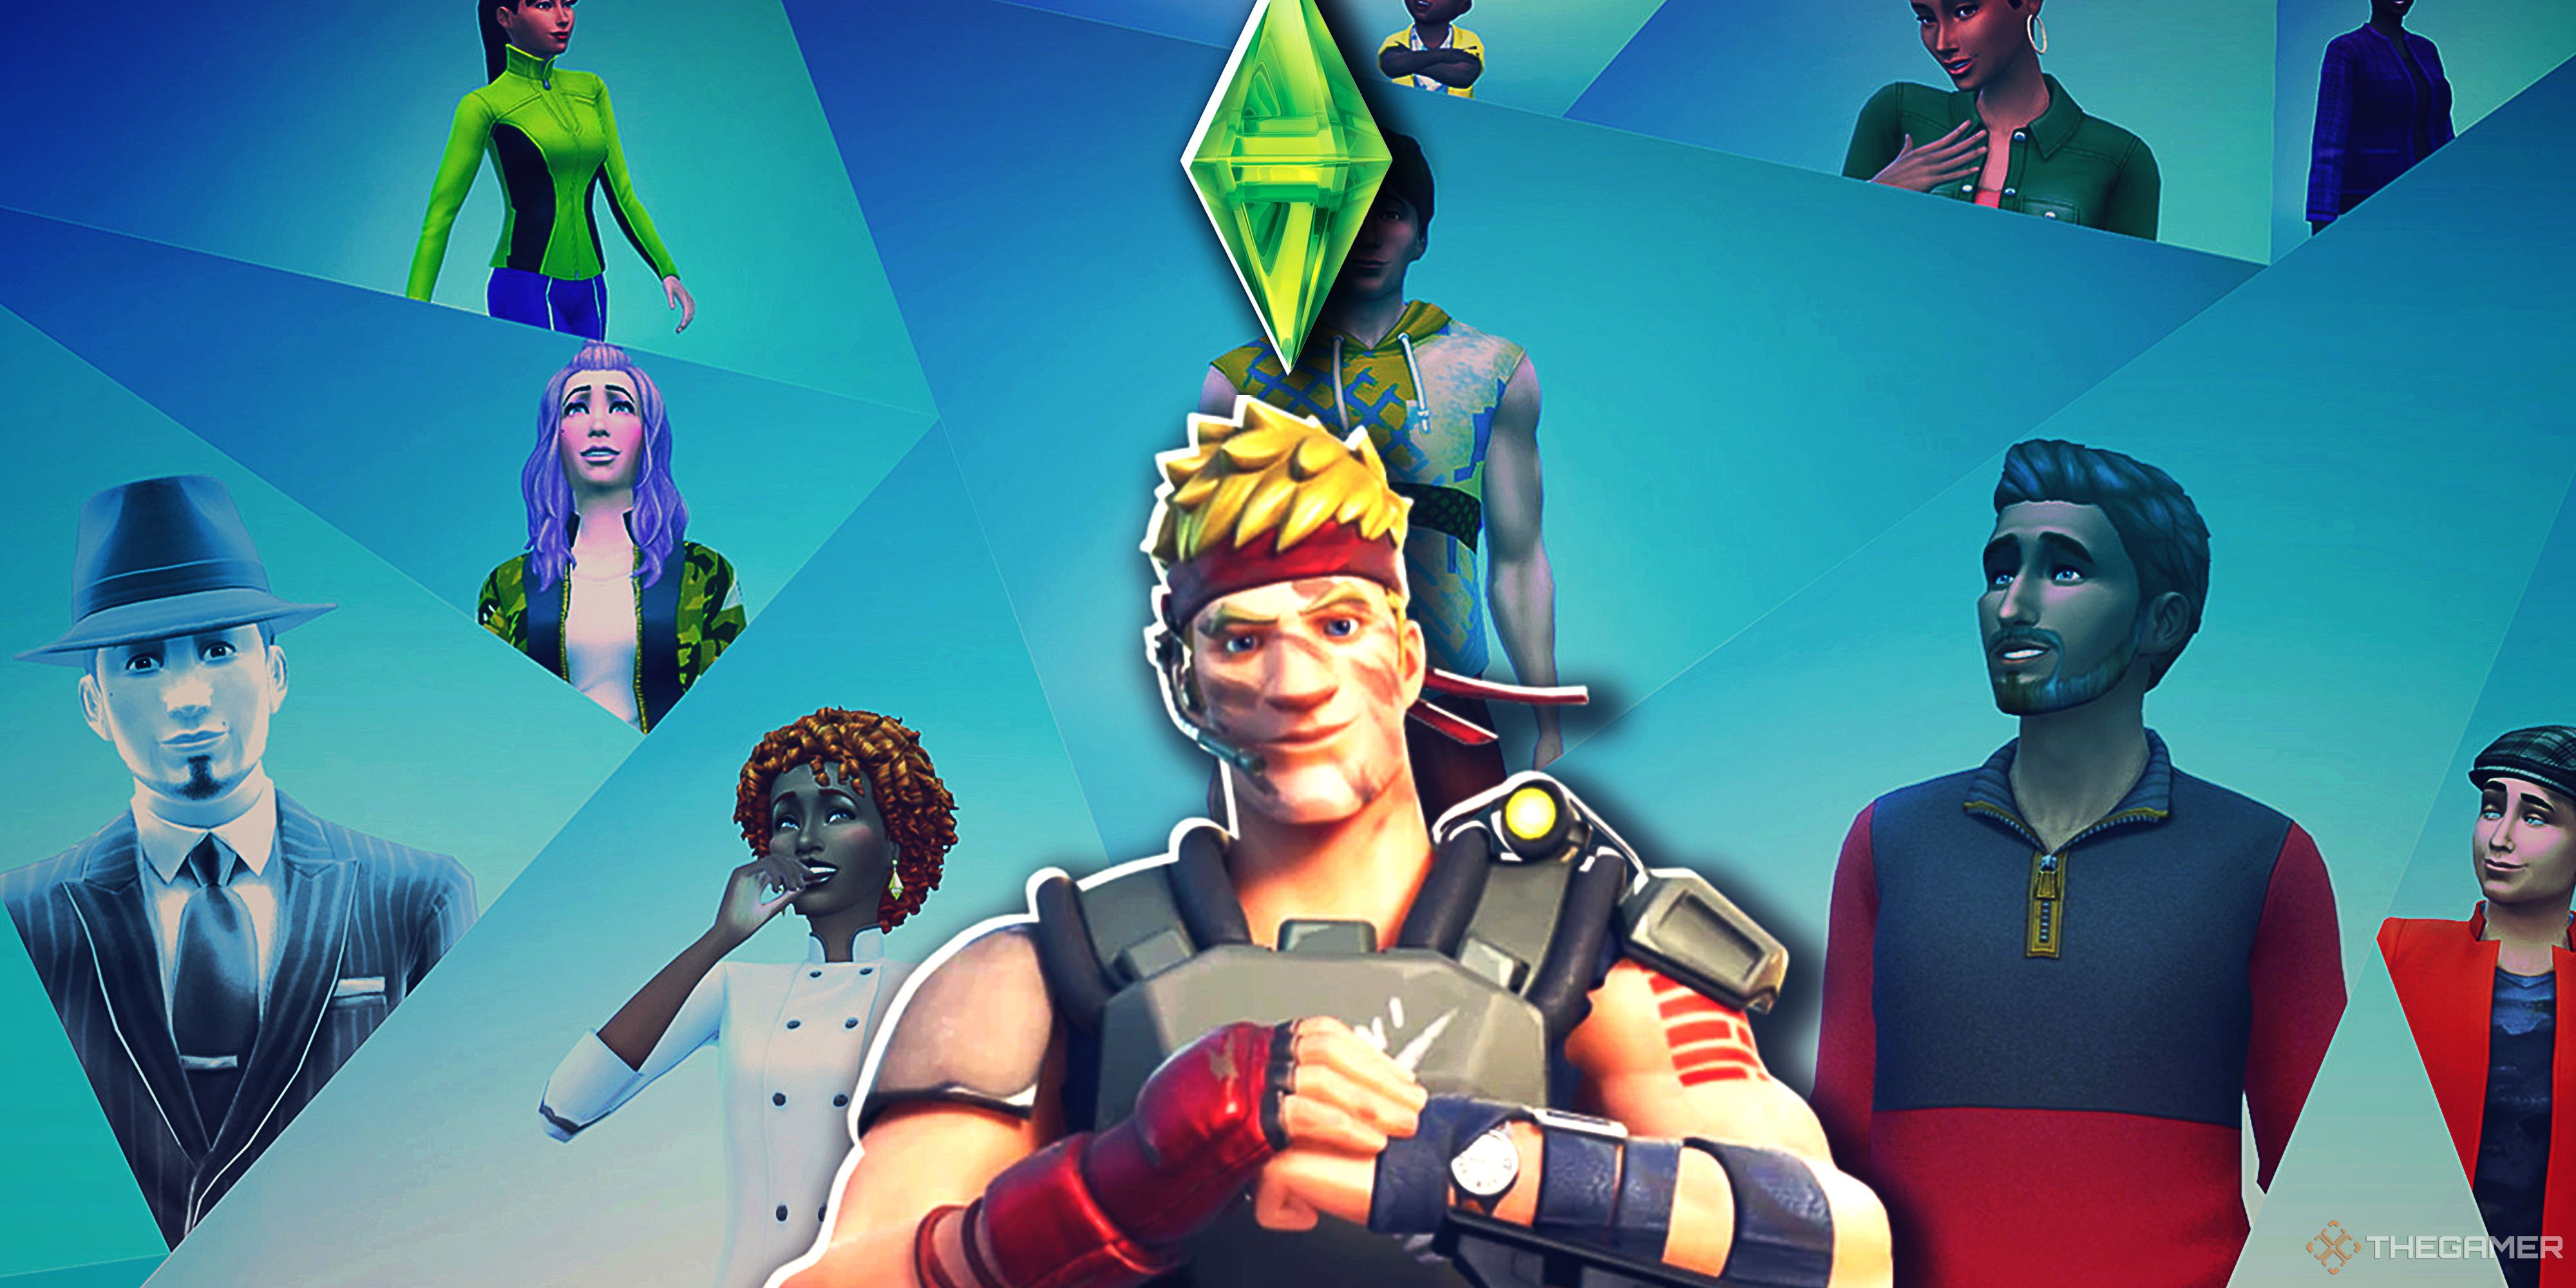 The background is a fractured collections of characters made in The Sims 4, with a character from another of EA's live-service games with a plumbob over his head in the foreground